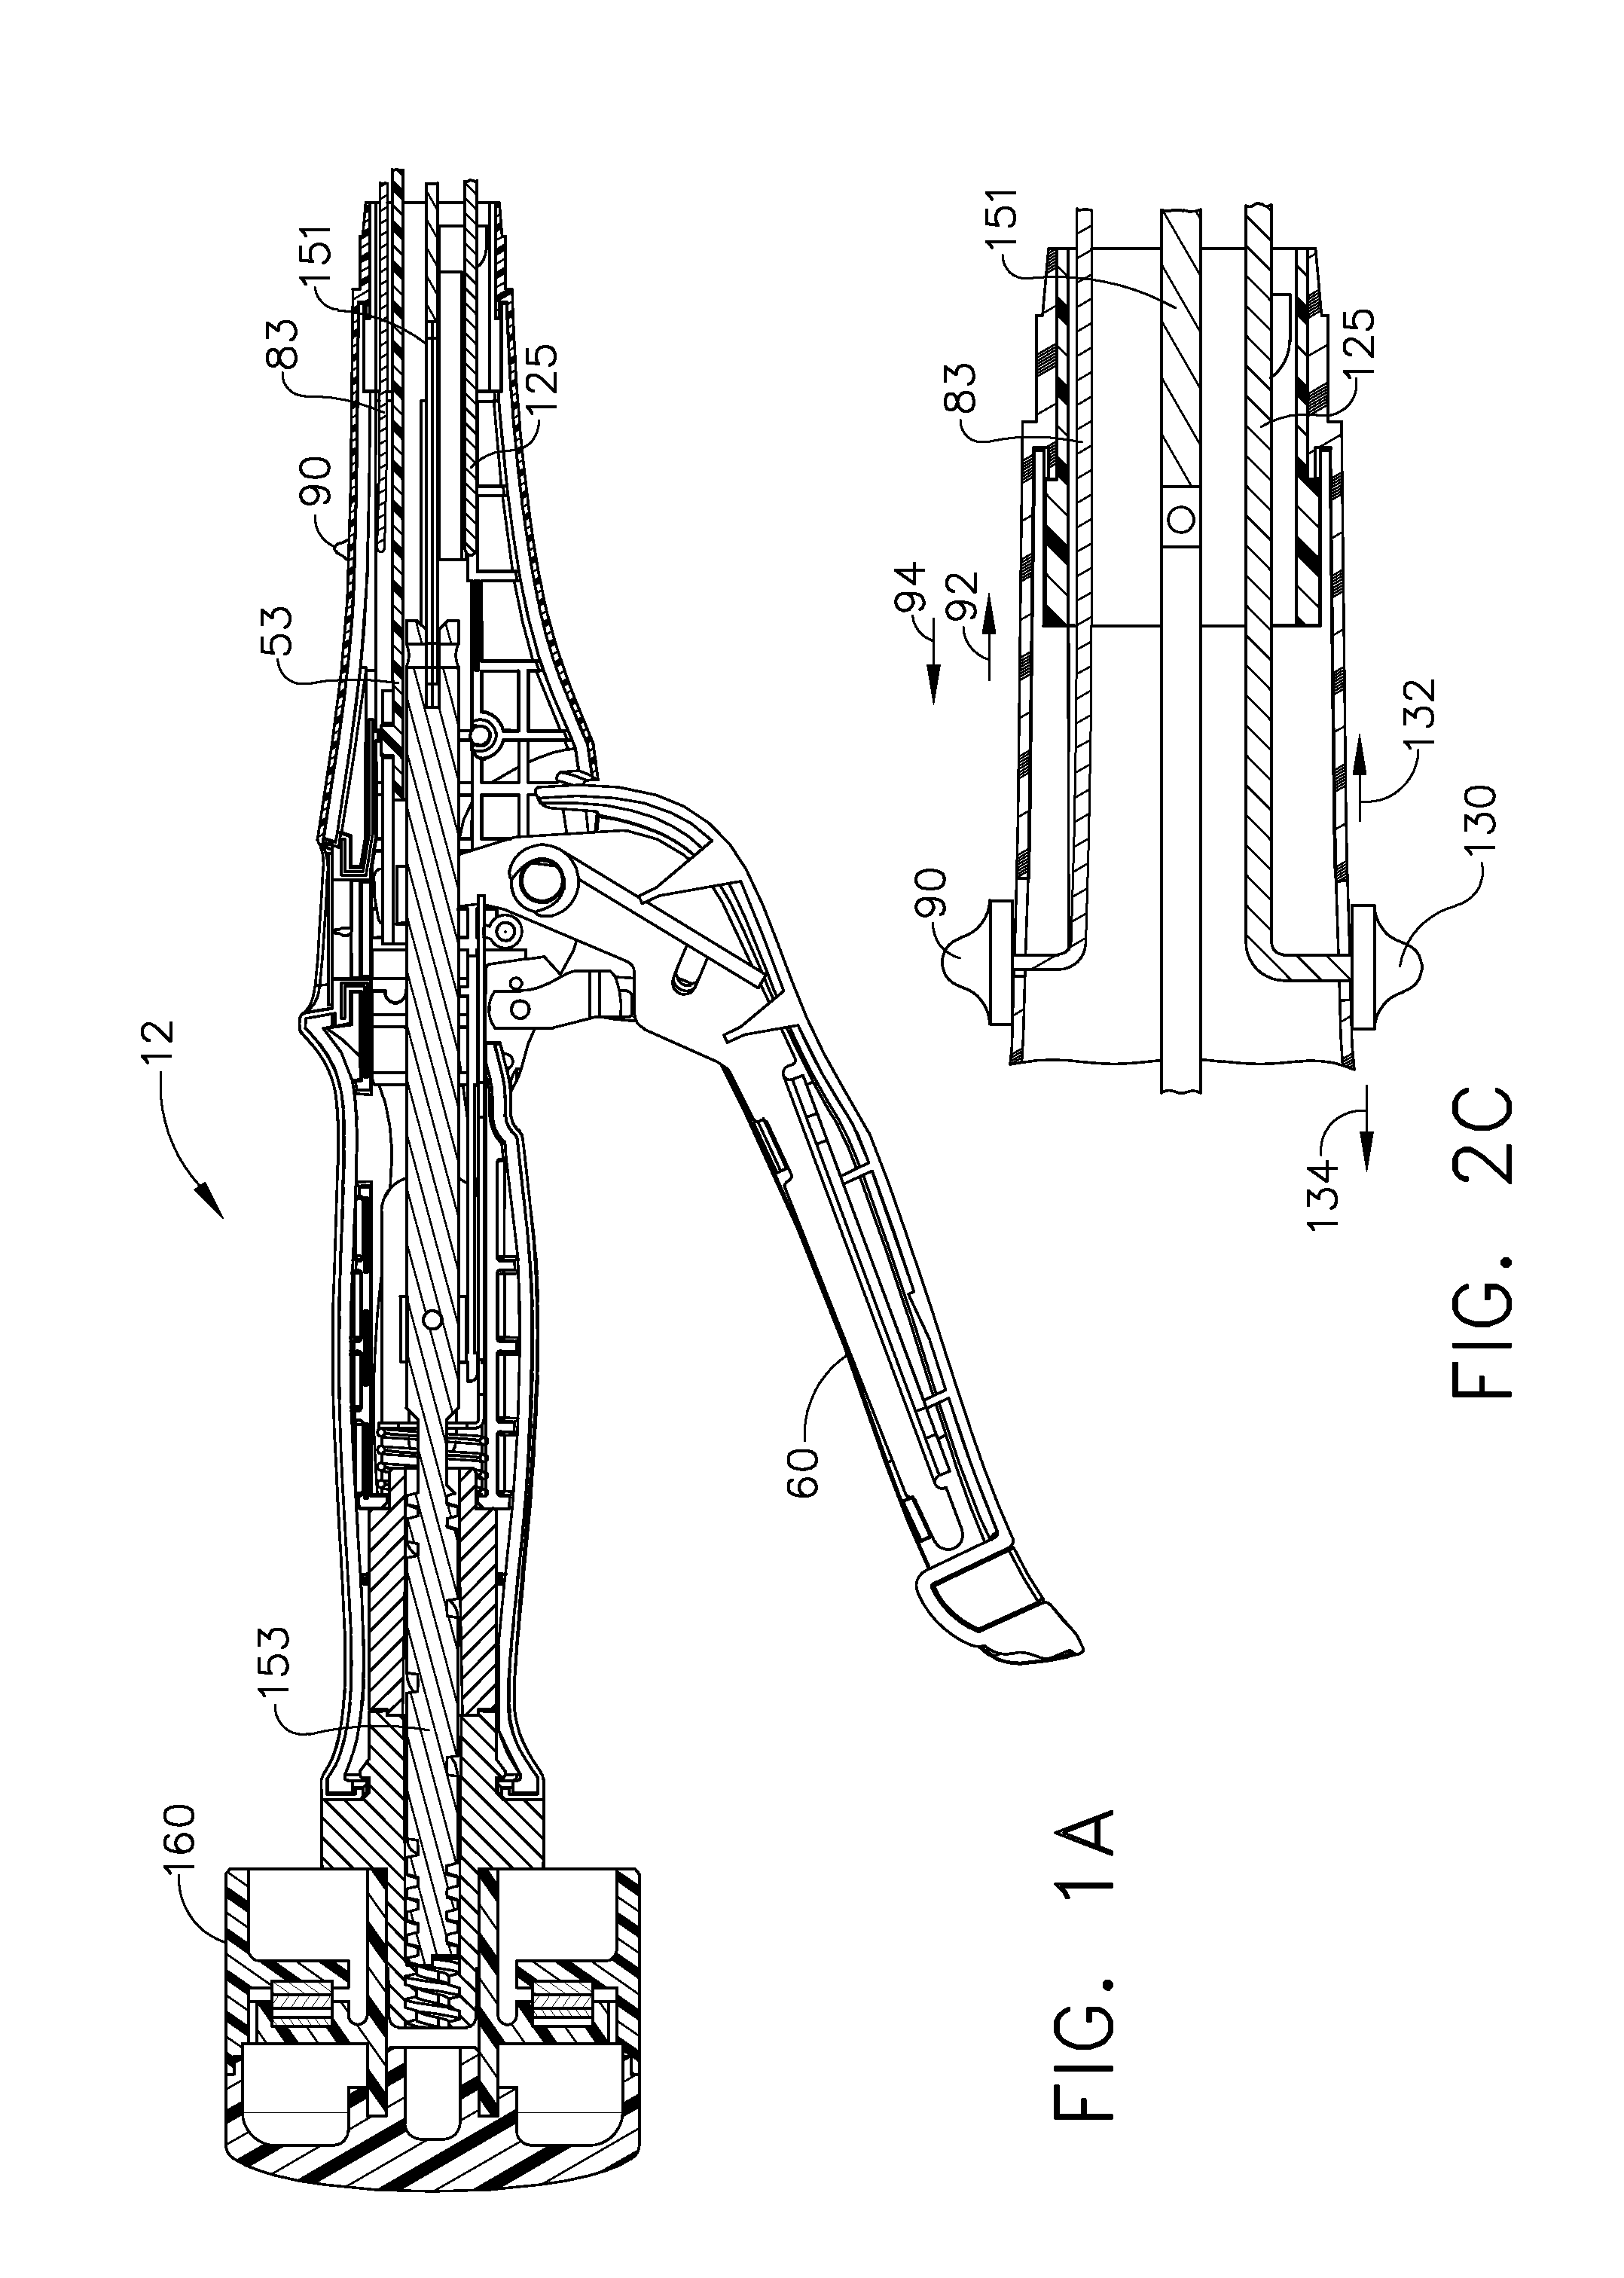 Apparatus and methods for protecting adjacent structures during the insertion of a surgical instrument into a tubular organ